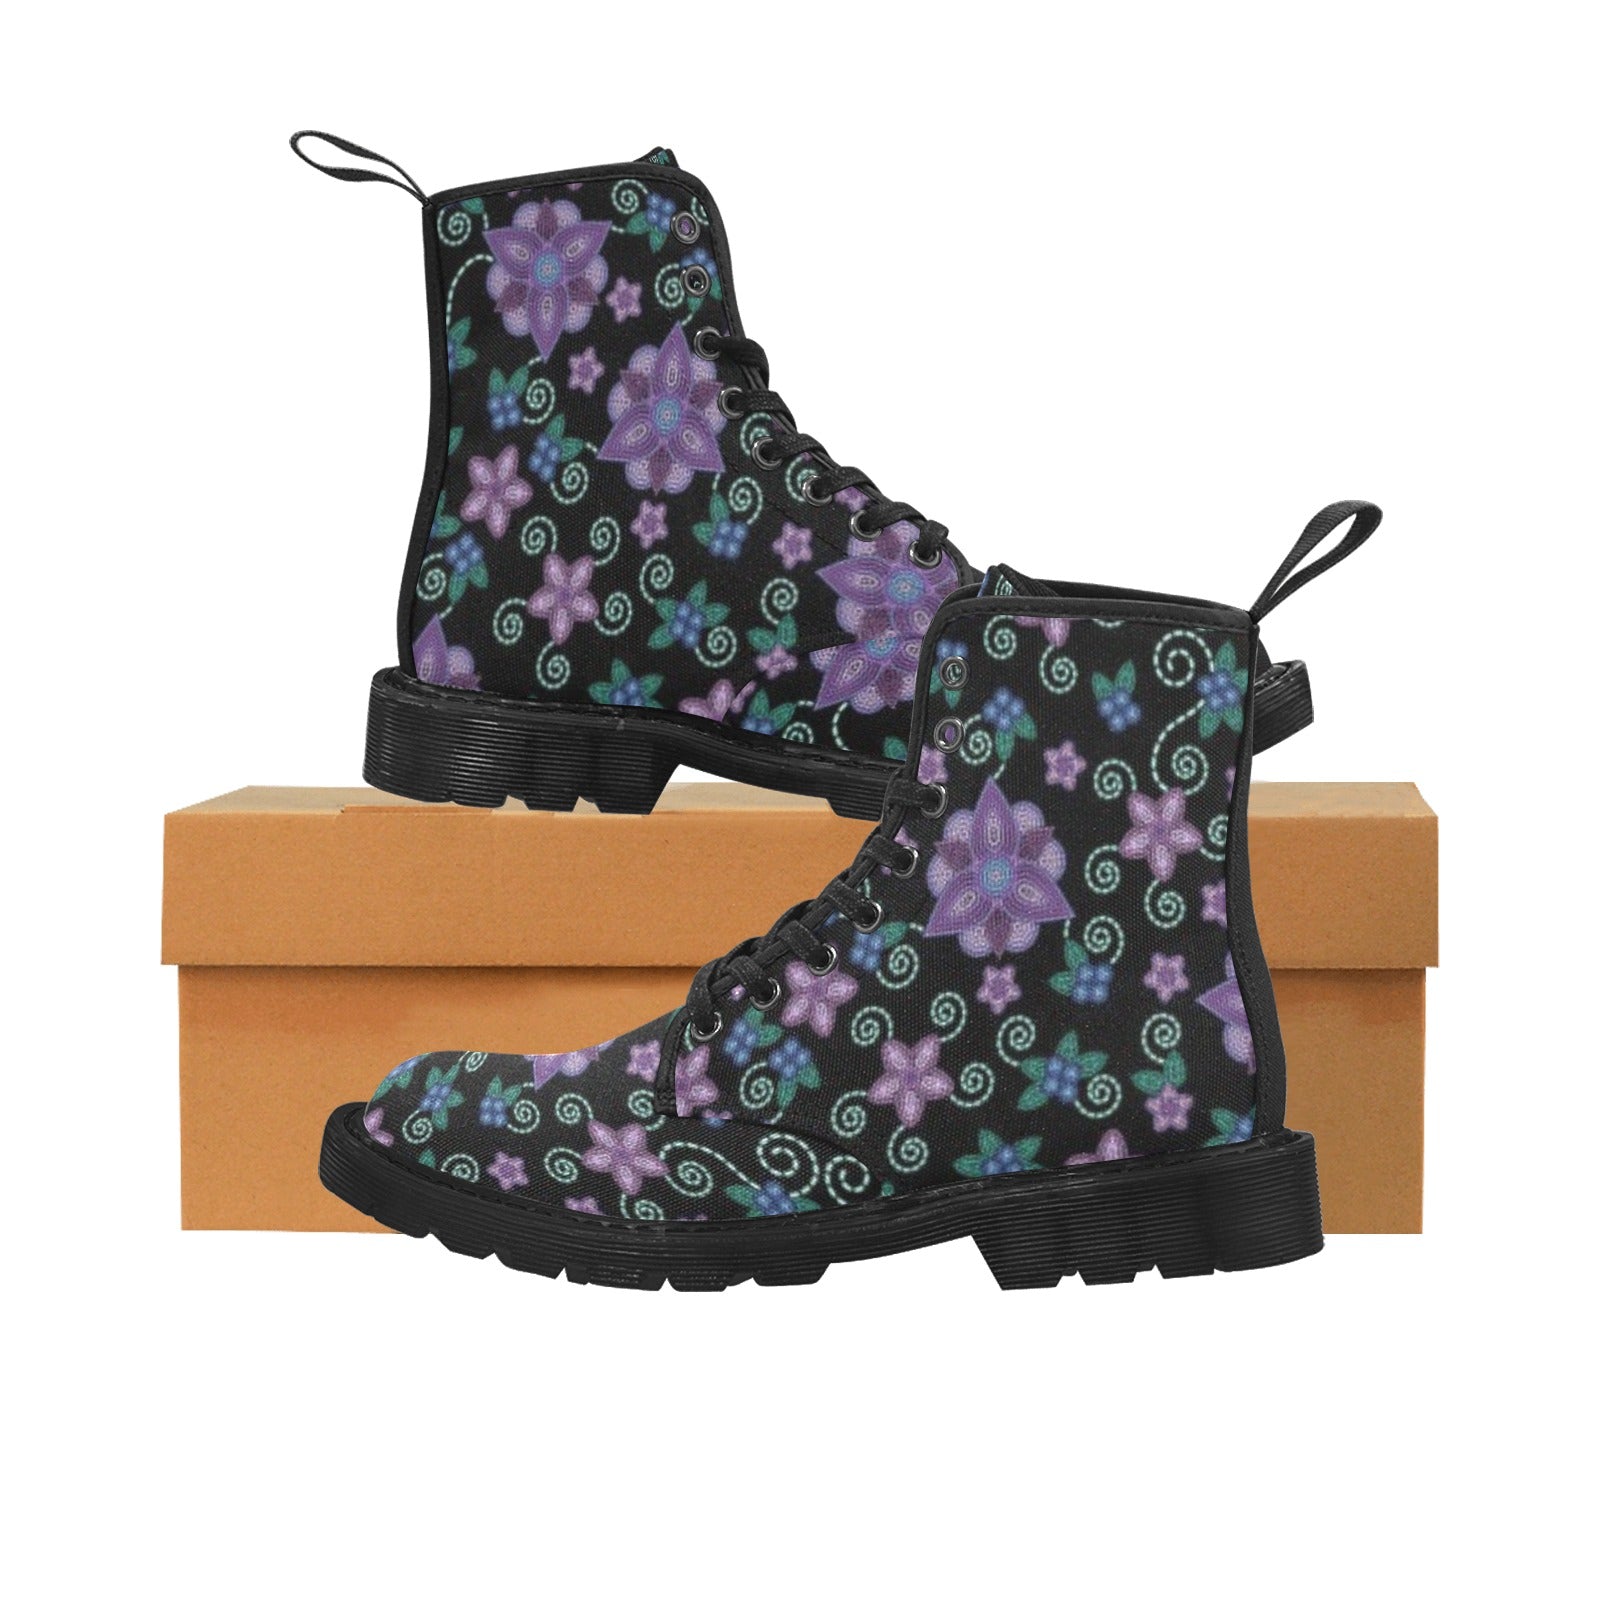 Berry Picking Boots for Women (Black)